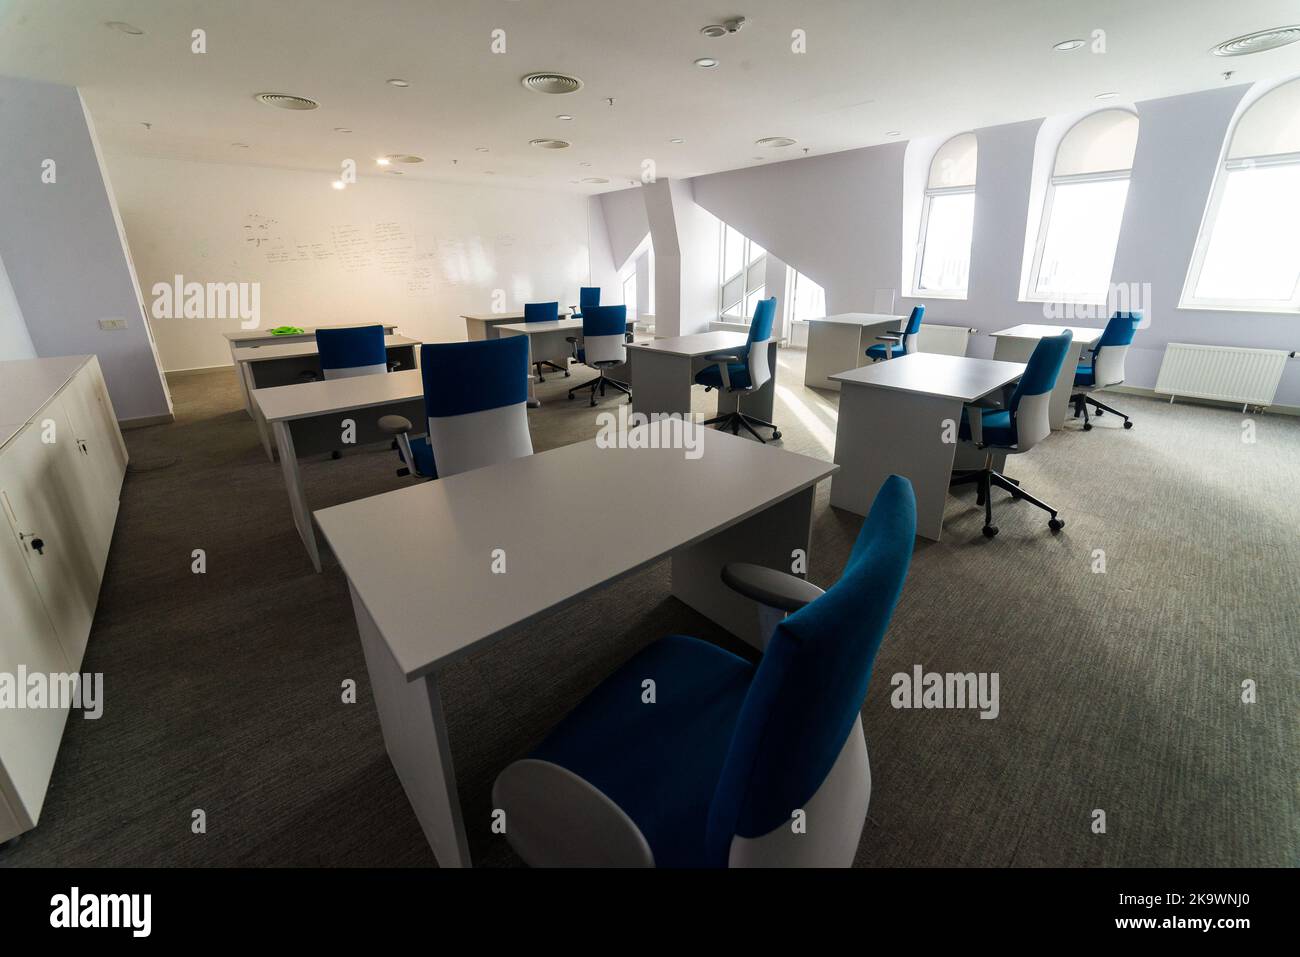 Meeting zone in the office in a loft style with white brick walls and concrete columns. Zone has a large wooden table with gray chairs and glass parti Stock Photo